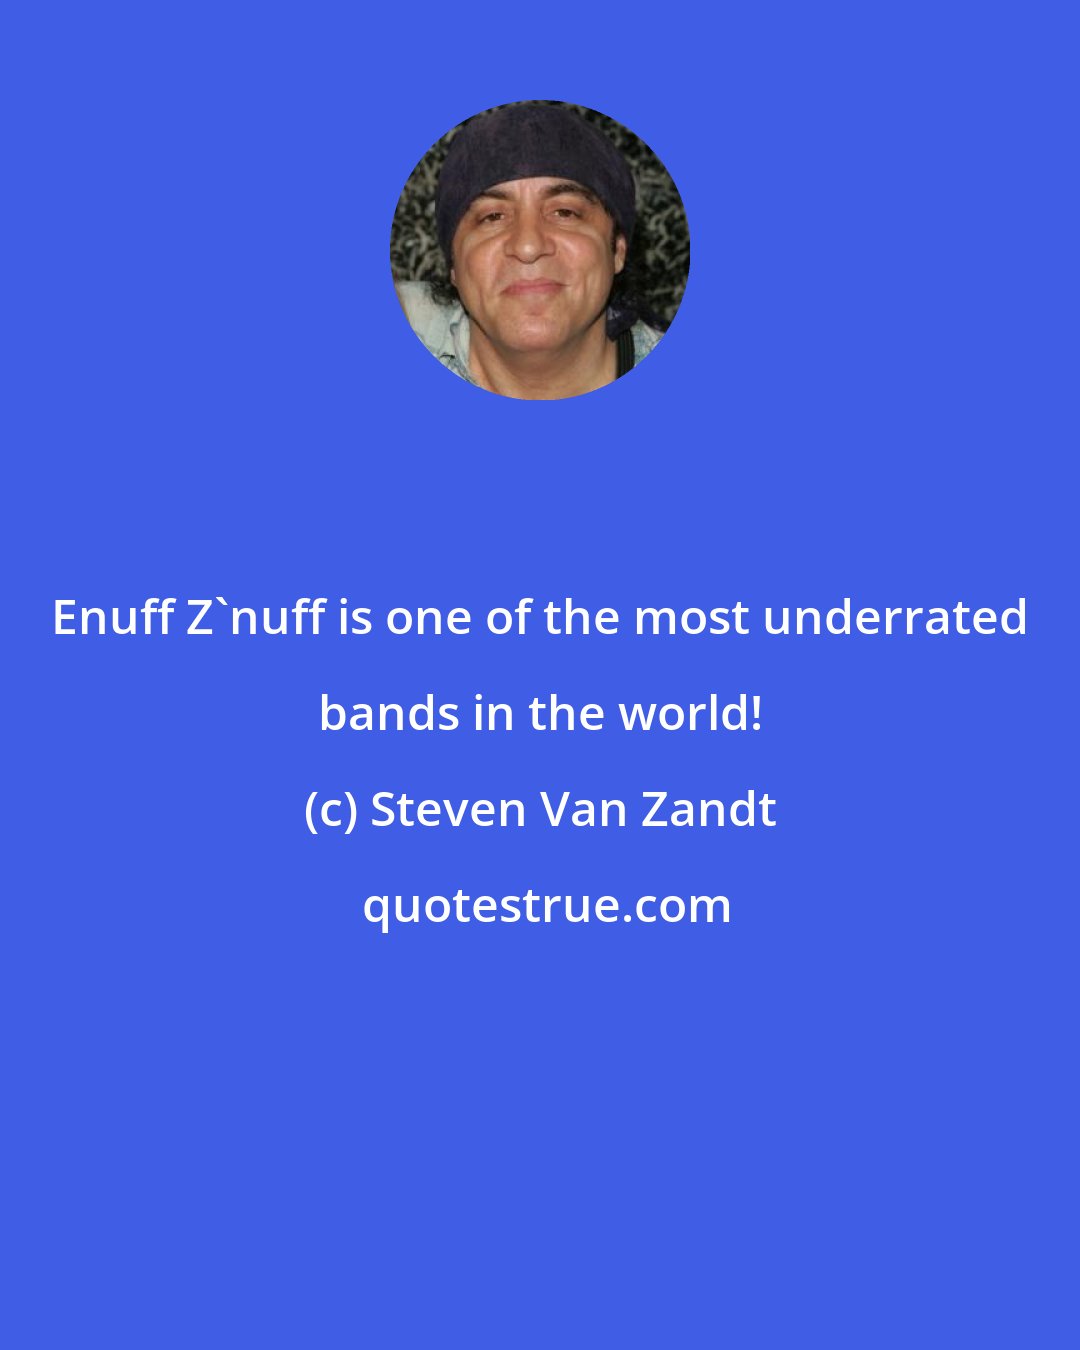 Steven Van Zandt: Enuff Z'nuff is one of the most underrated bands in the world!